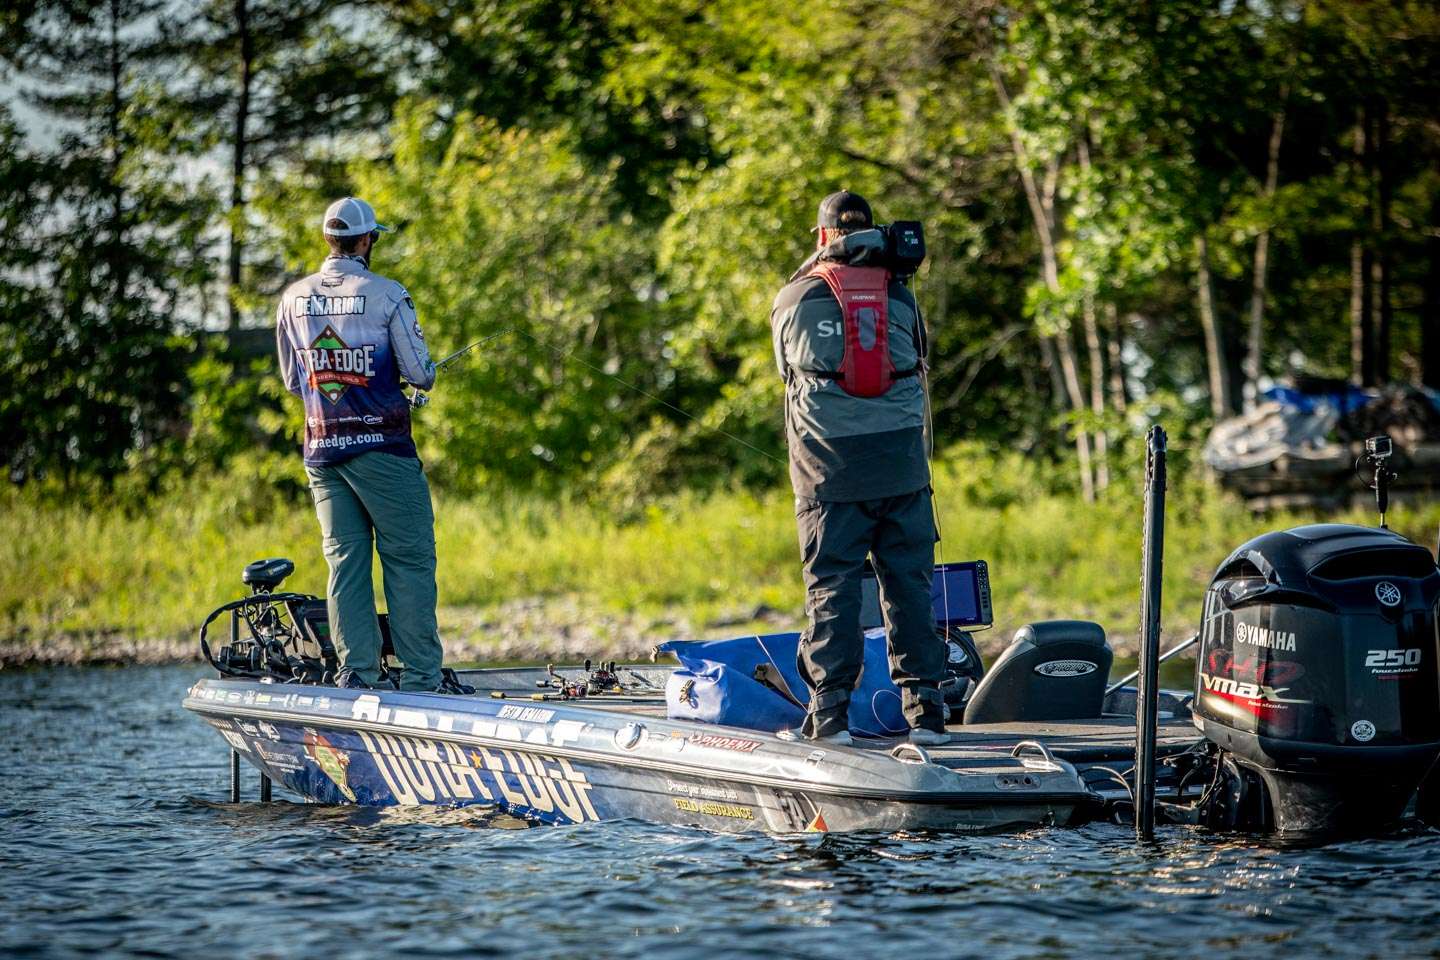 Go out on the water with Destin DeMarion on Semifinal Sunday of the Guaranteed Rate Bassmaster Elite at Lake Champlain! 